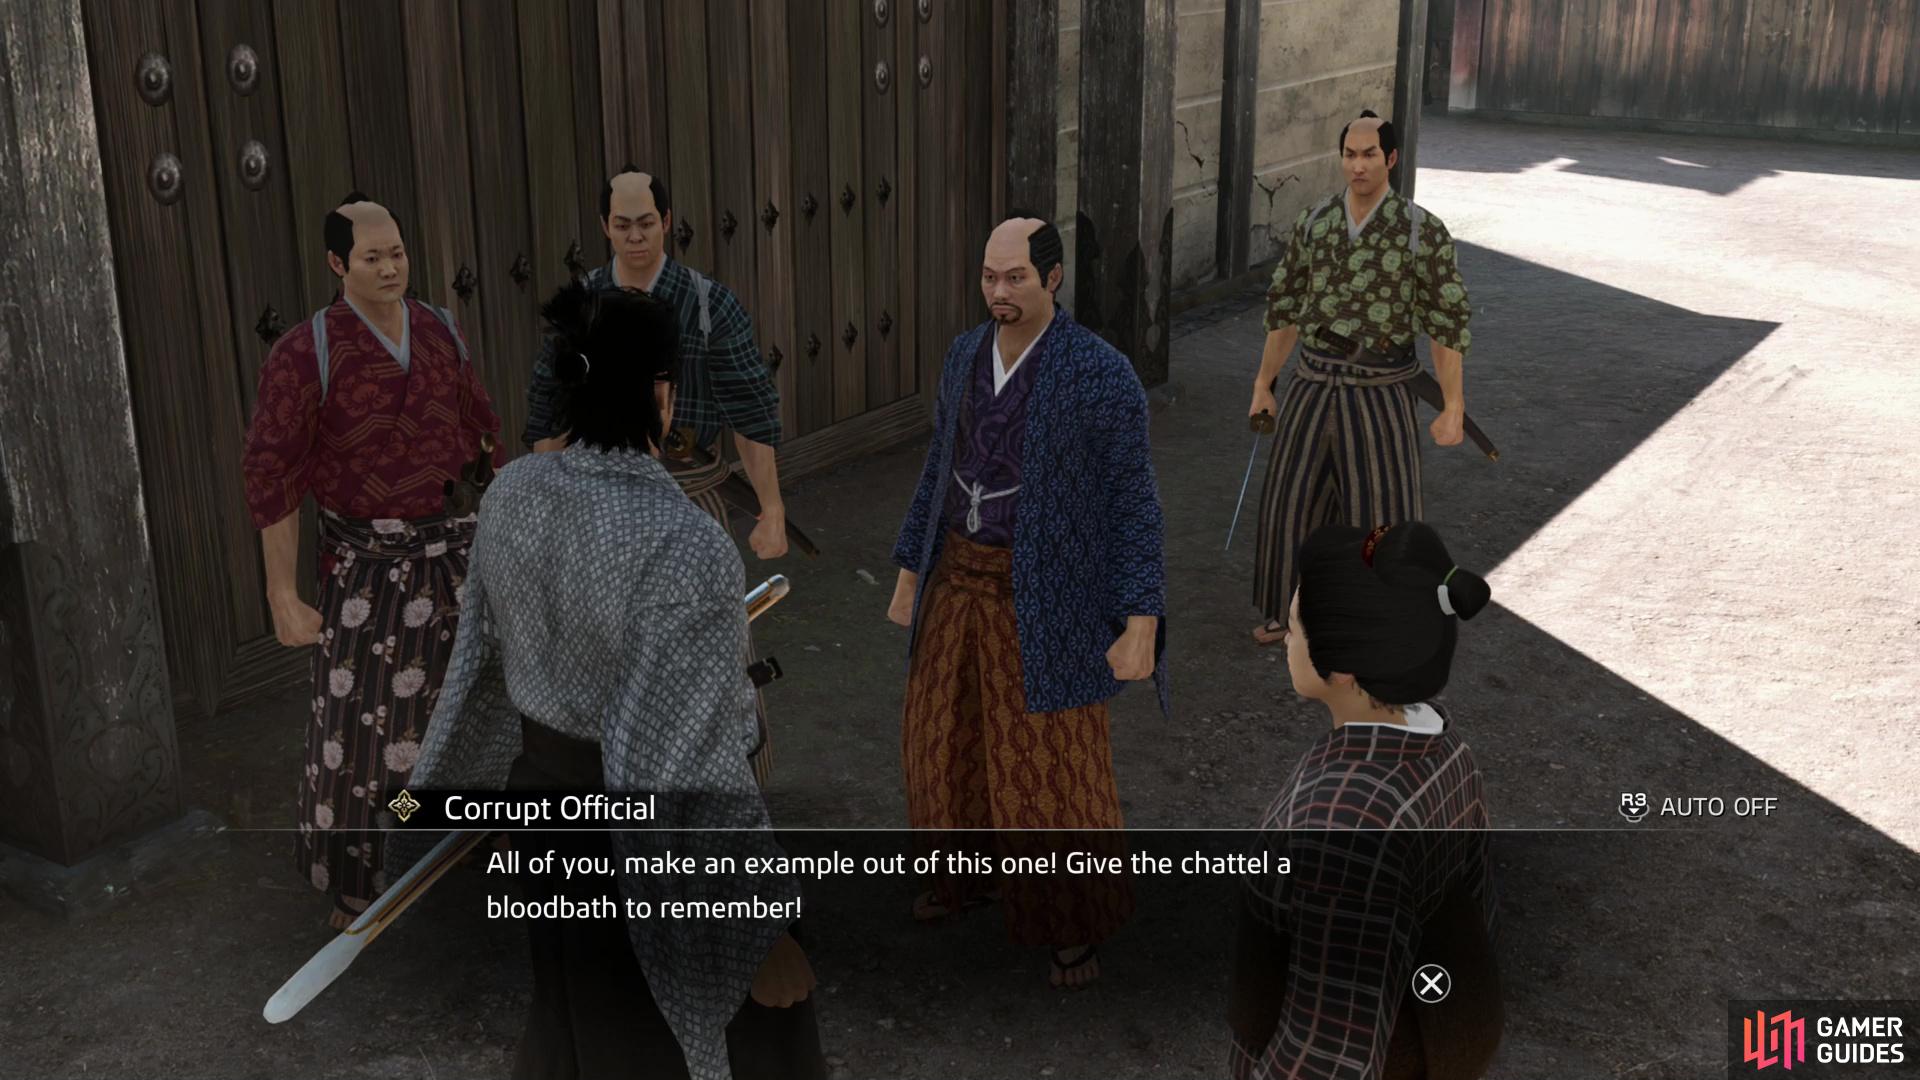 A Corrupt Official will arrive to disperse the crowds, turning his violent intentions onto Ryoma when he intervenes.